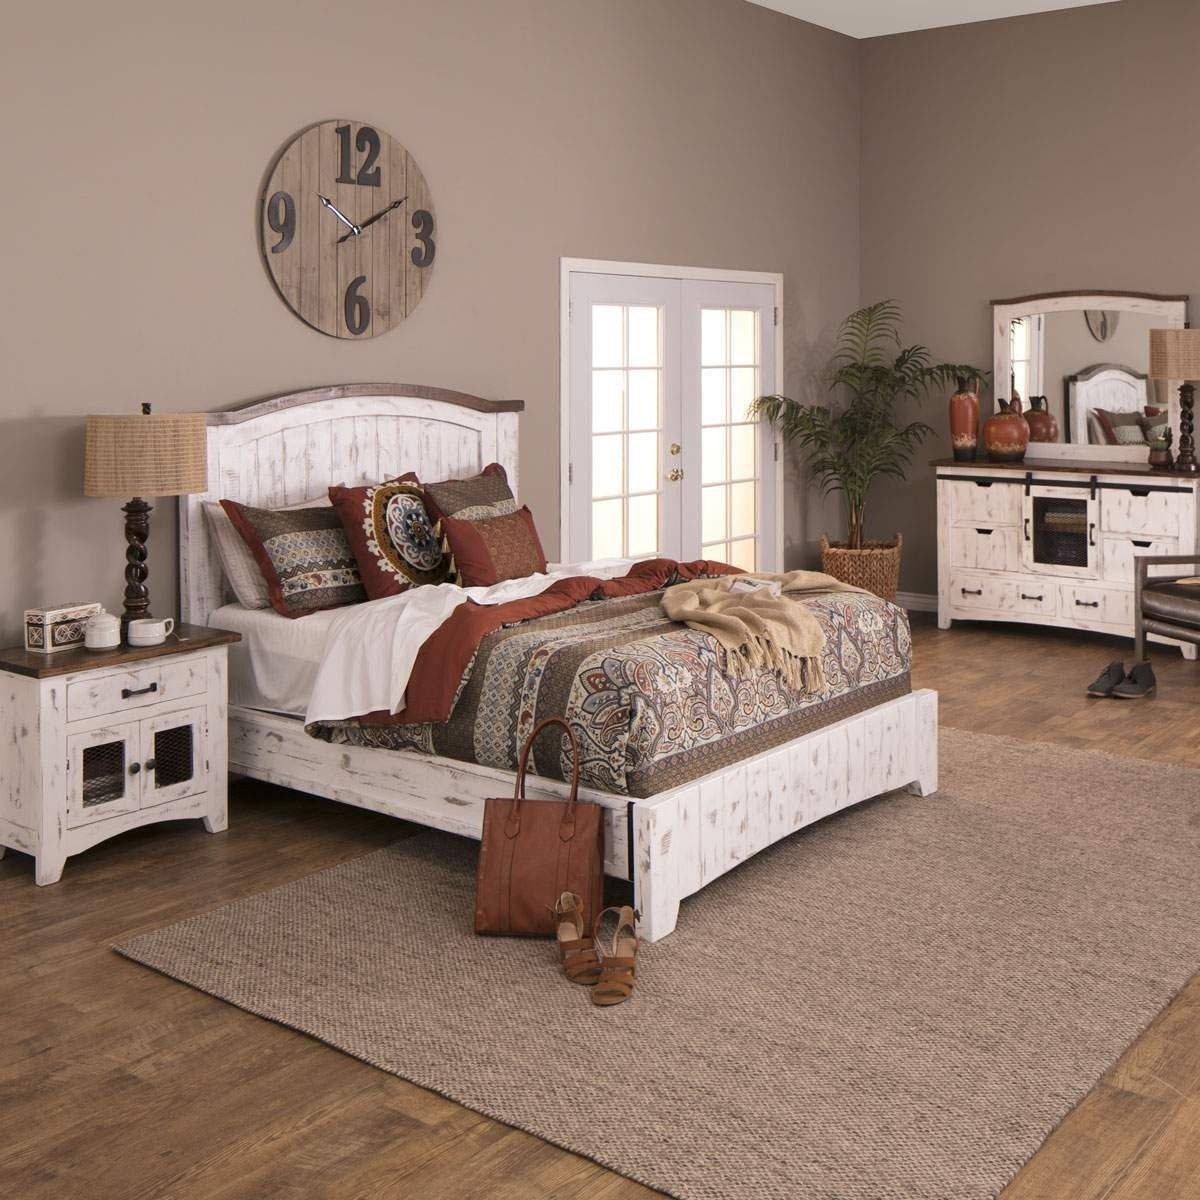 The laid back style of the potter bedroom set is